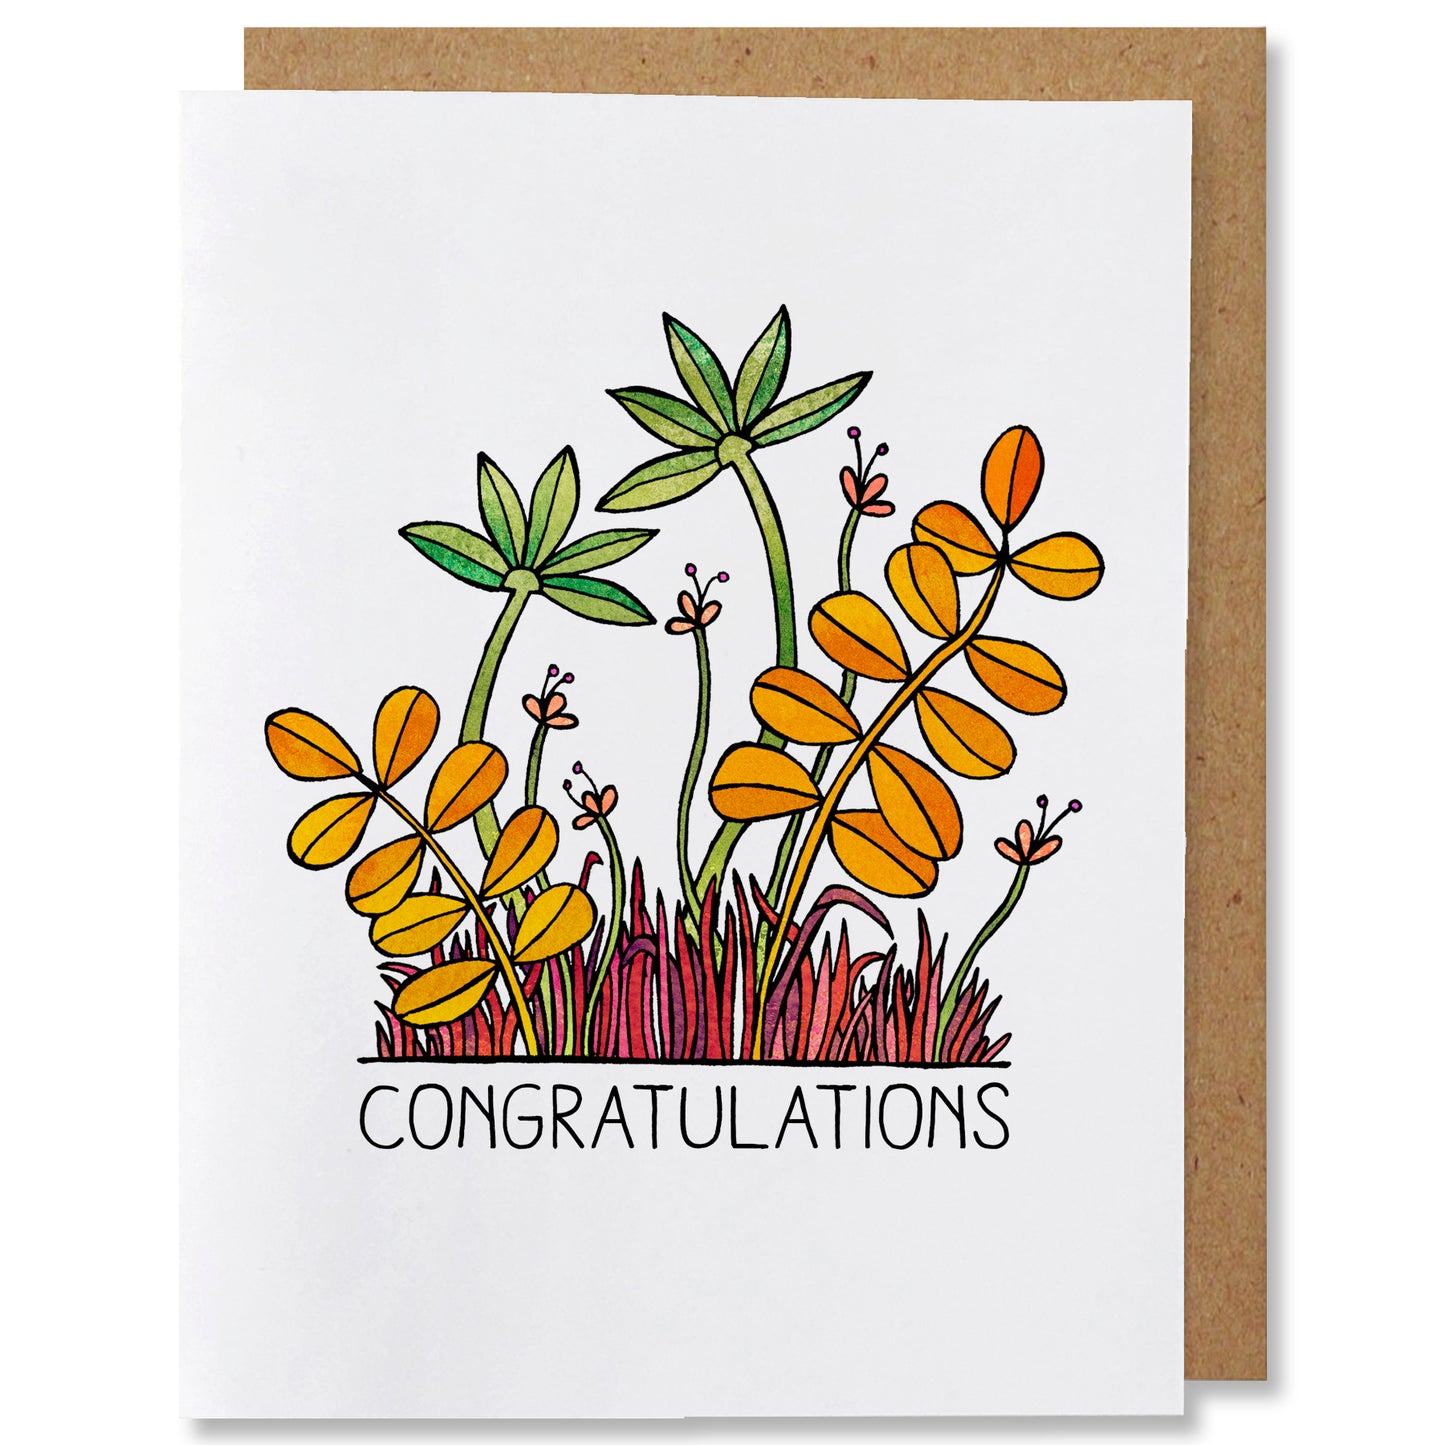 Illustrated greeting card featuring an arrangement of orange and green plants growing from red grass with “congratulations” written below